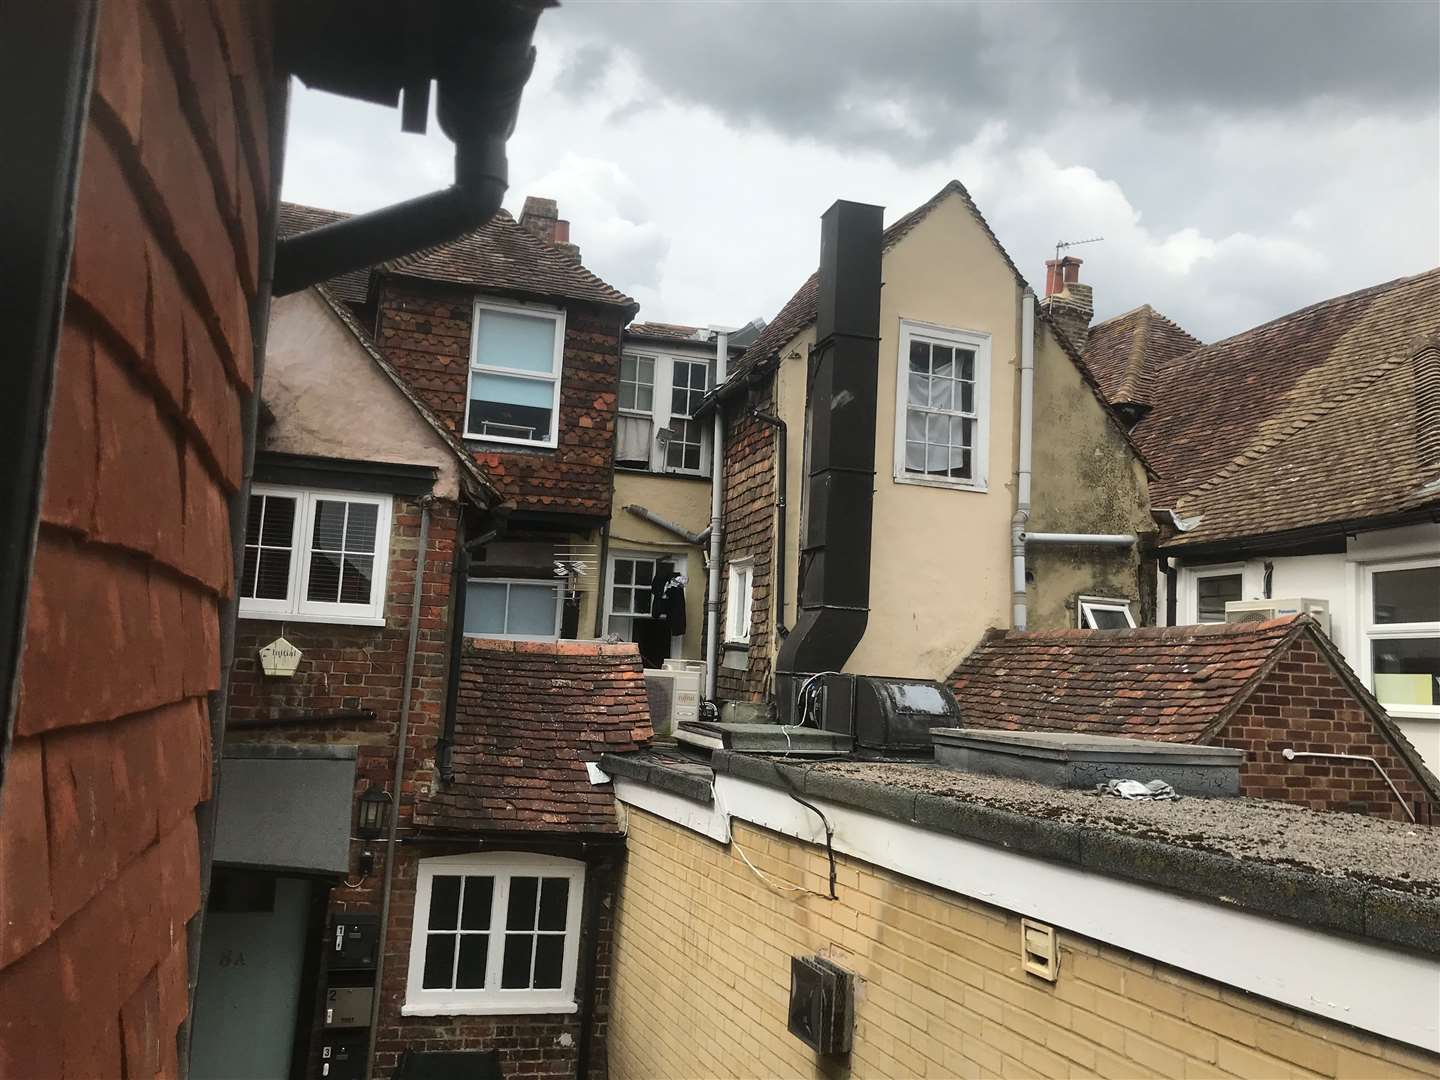 Desh is somewhere in that direction on the High Street behind these buildings in West Malling